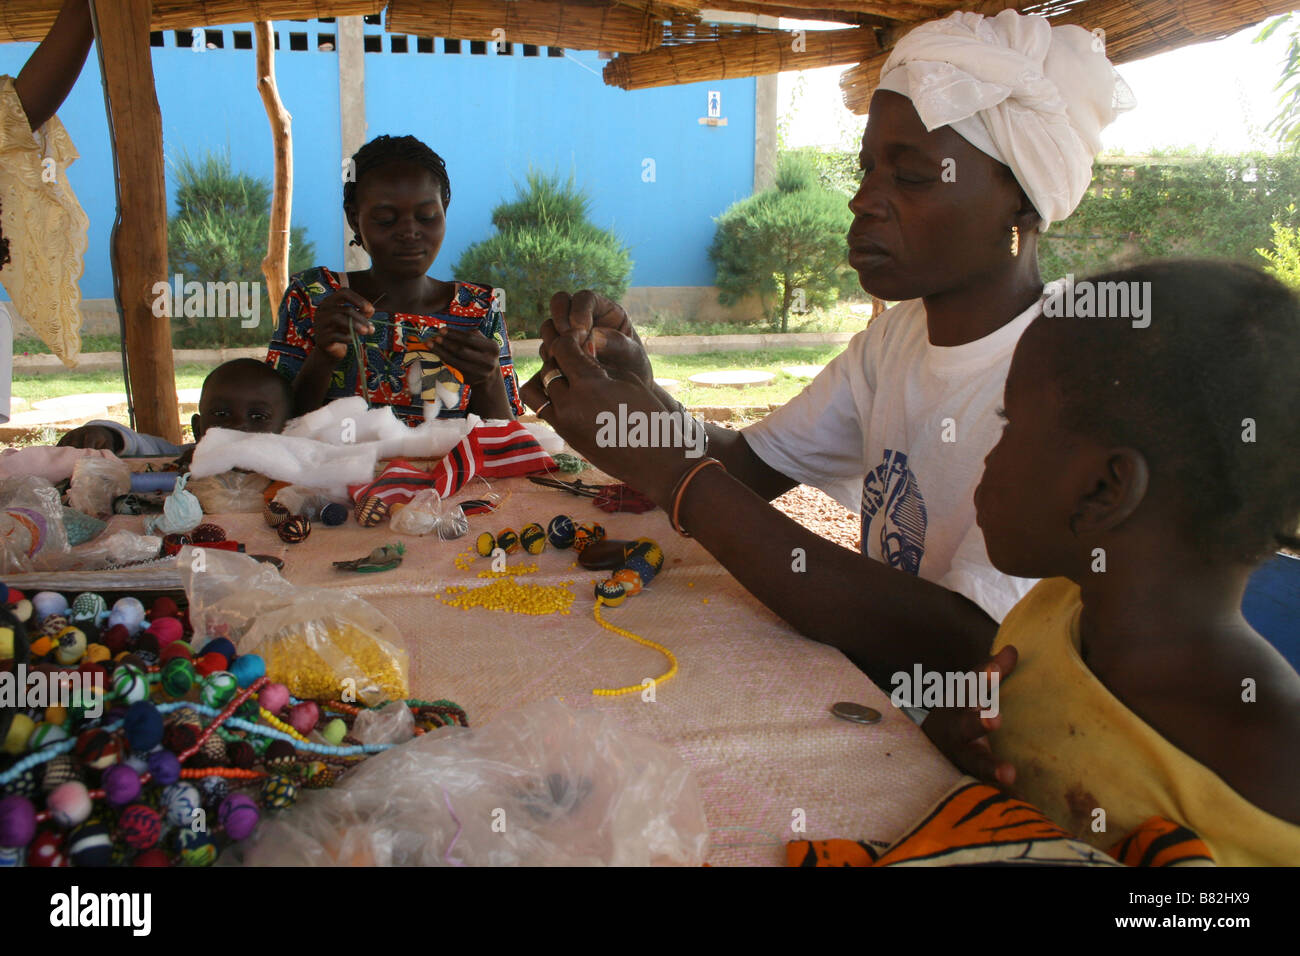 African craftwomen at work making fabric beads while their children watch Stock Photo